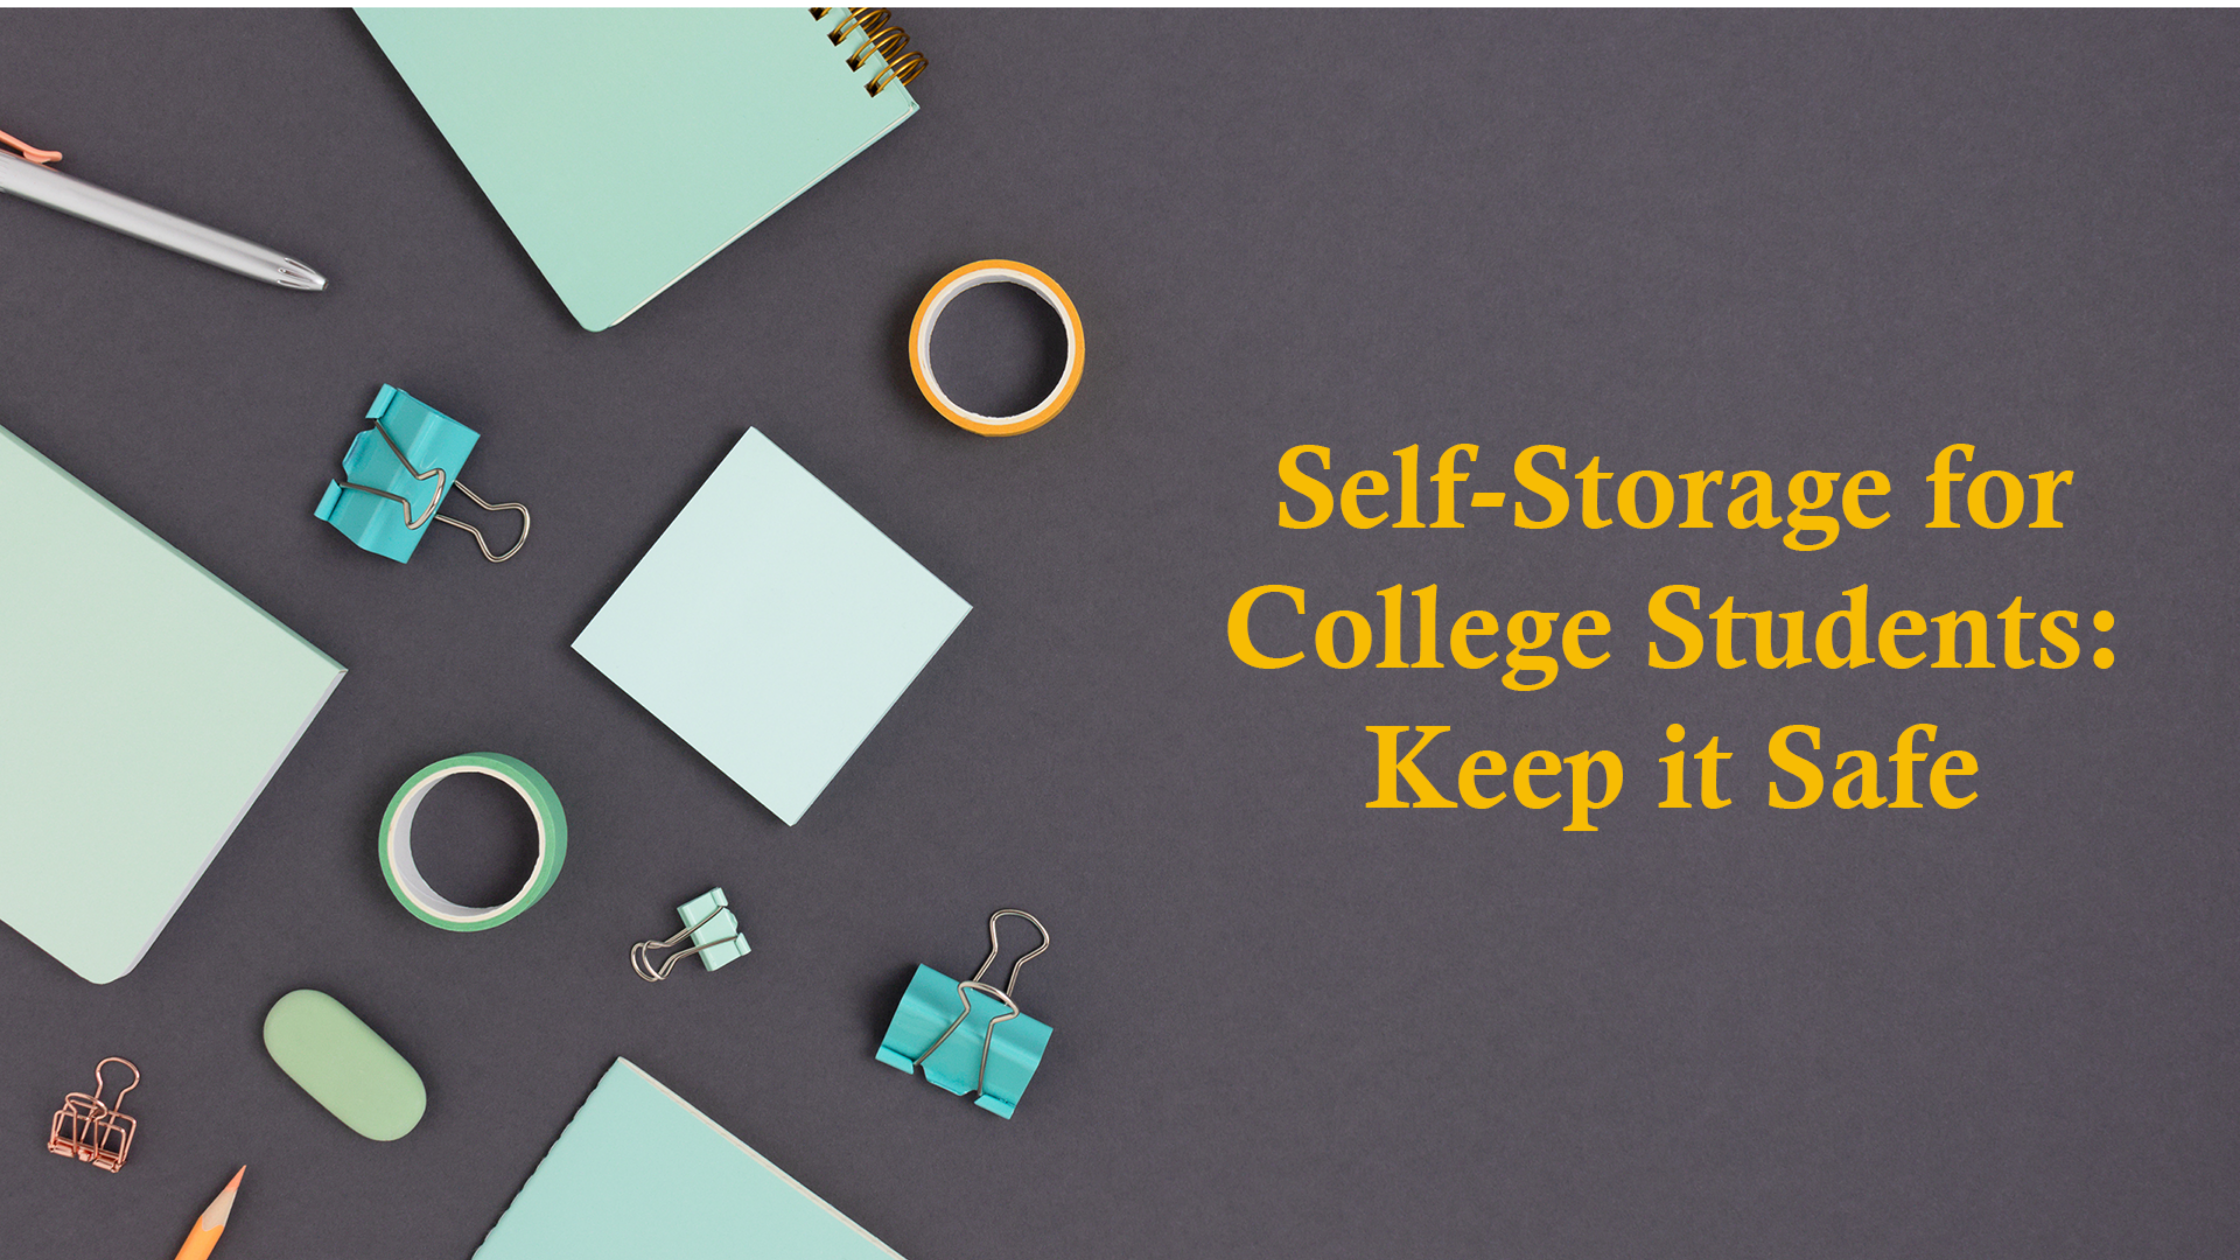 Keep-Your-College-Student-Safe